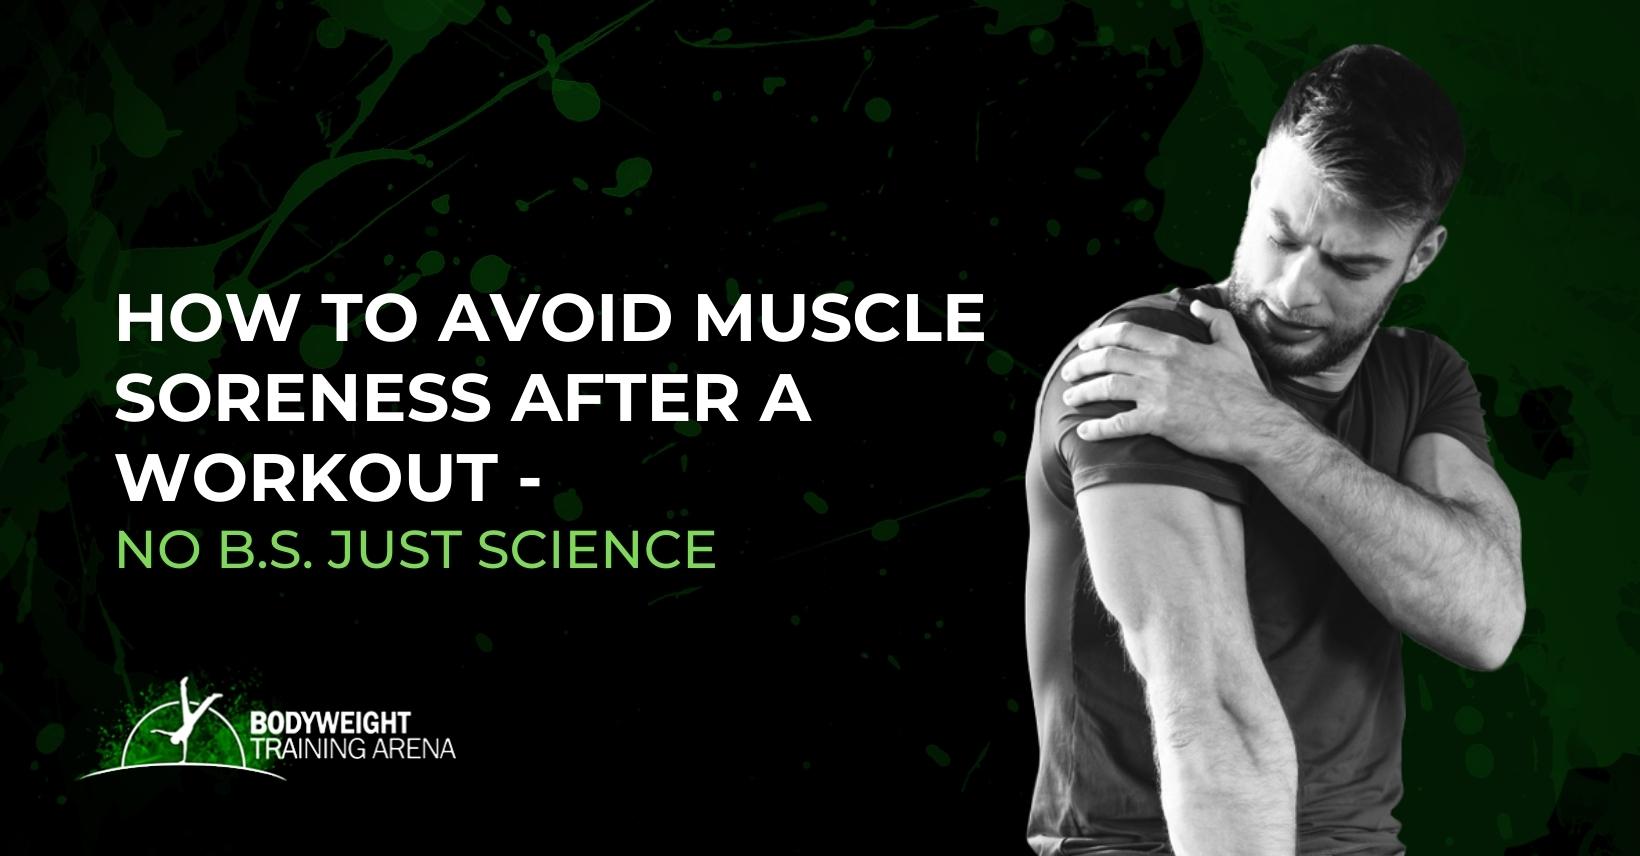 How to avoid muscle soreness after a workout – No B.S. just science